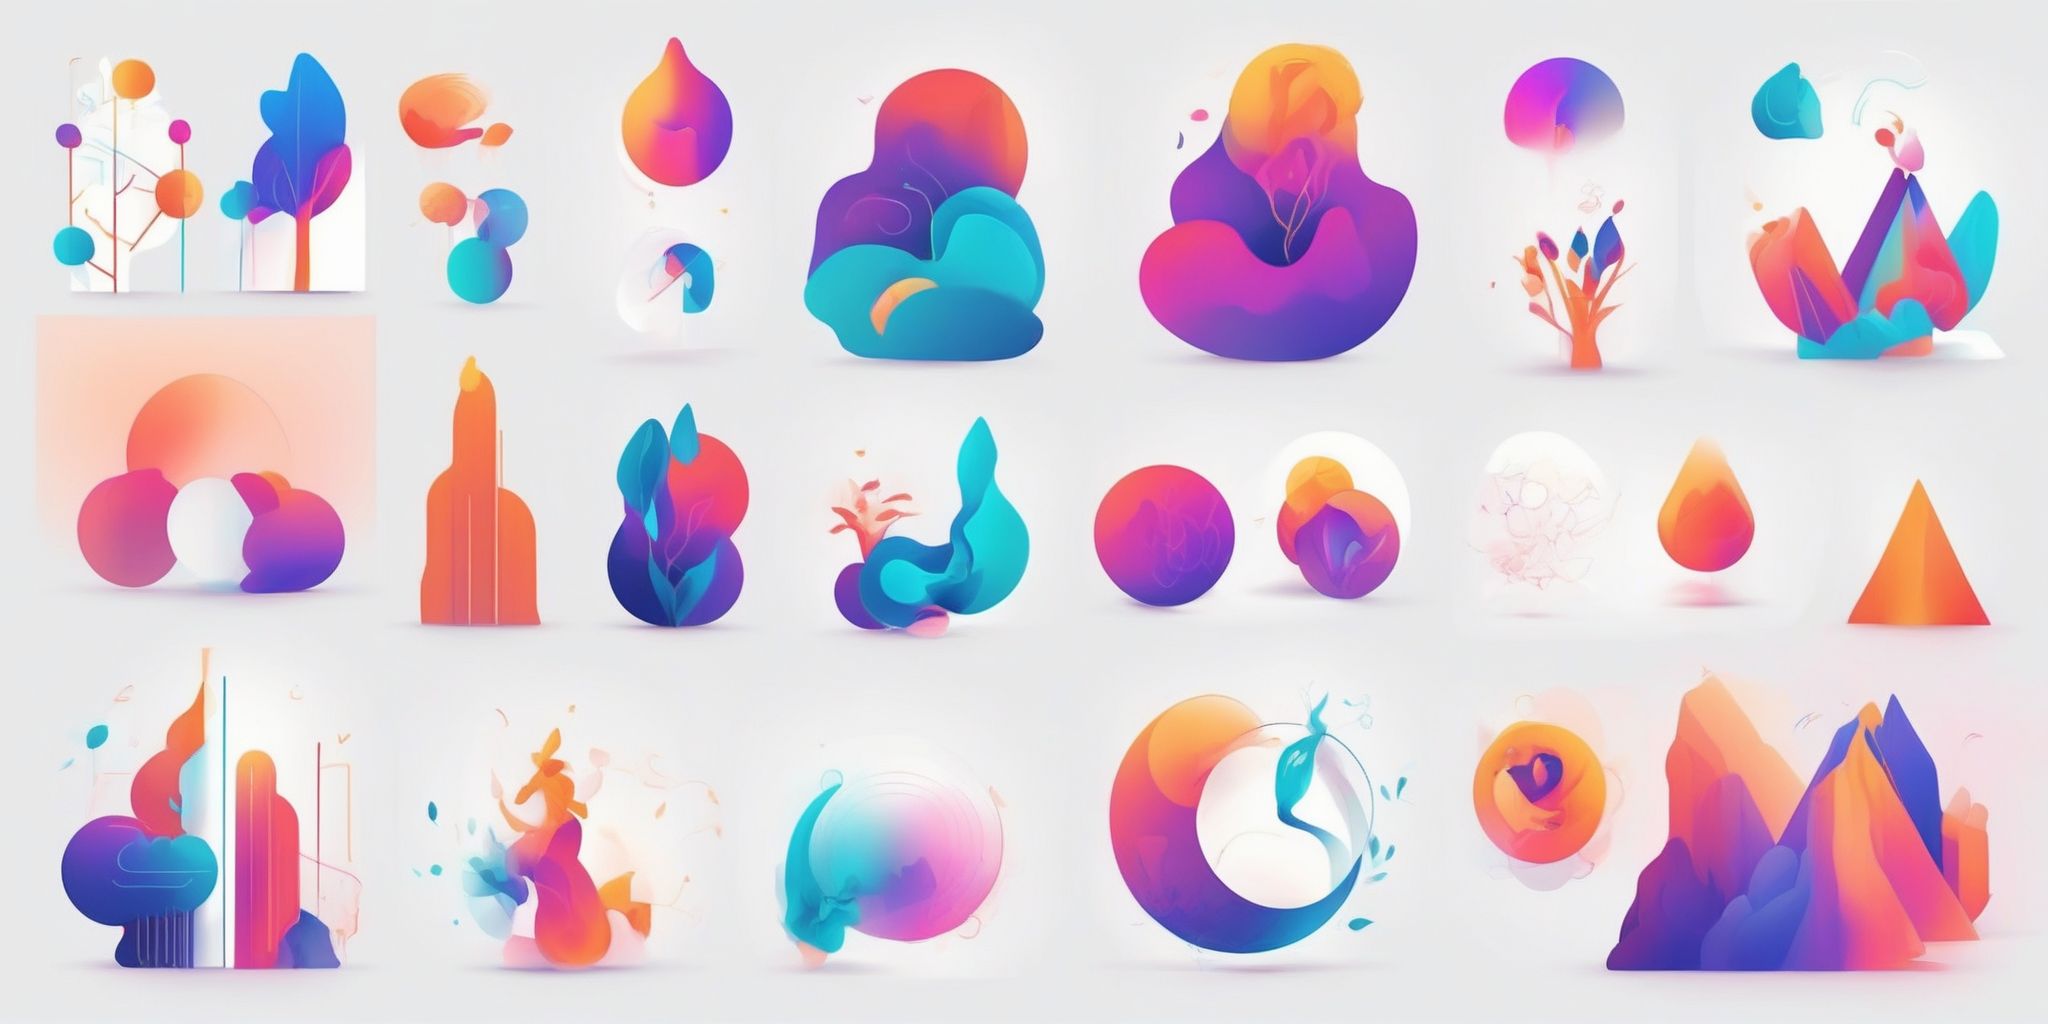 Core principles in illustration style with gradients and white background